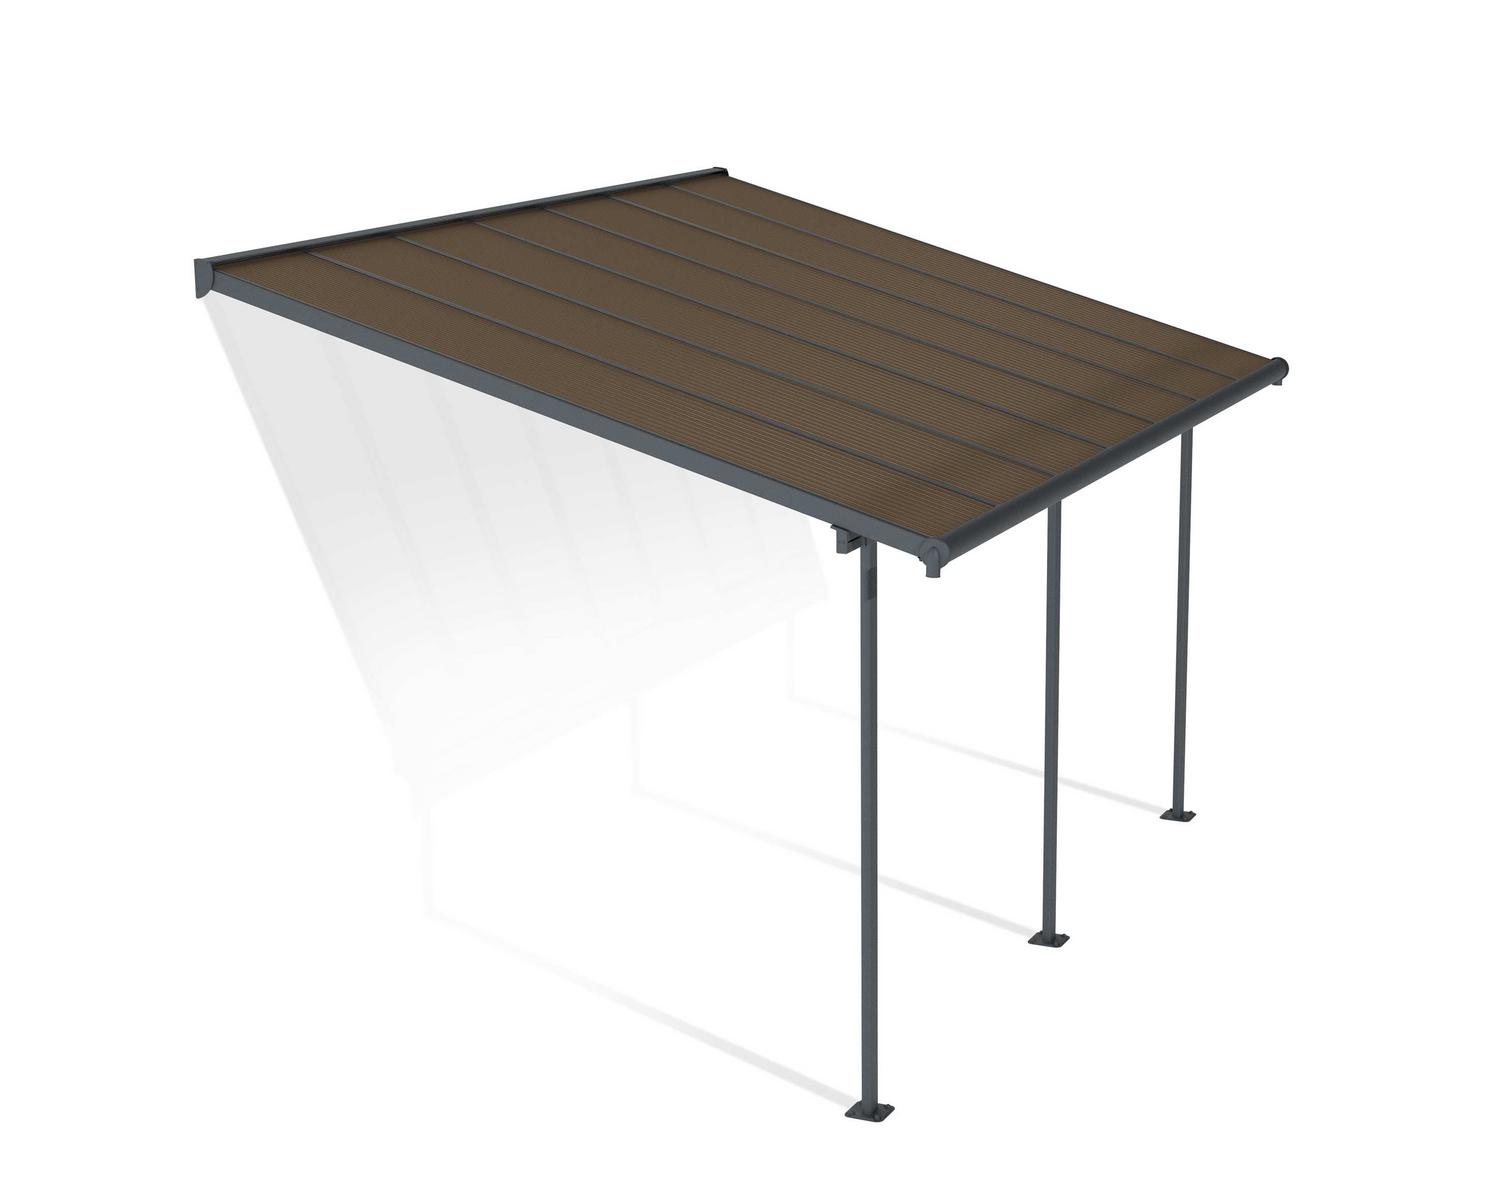 Capri 10 ft. x 14 ft. Grey Aluminium Patio Cover With 3 Posts, Bronze-tinted twin-wall polycarbonate roof panels.